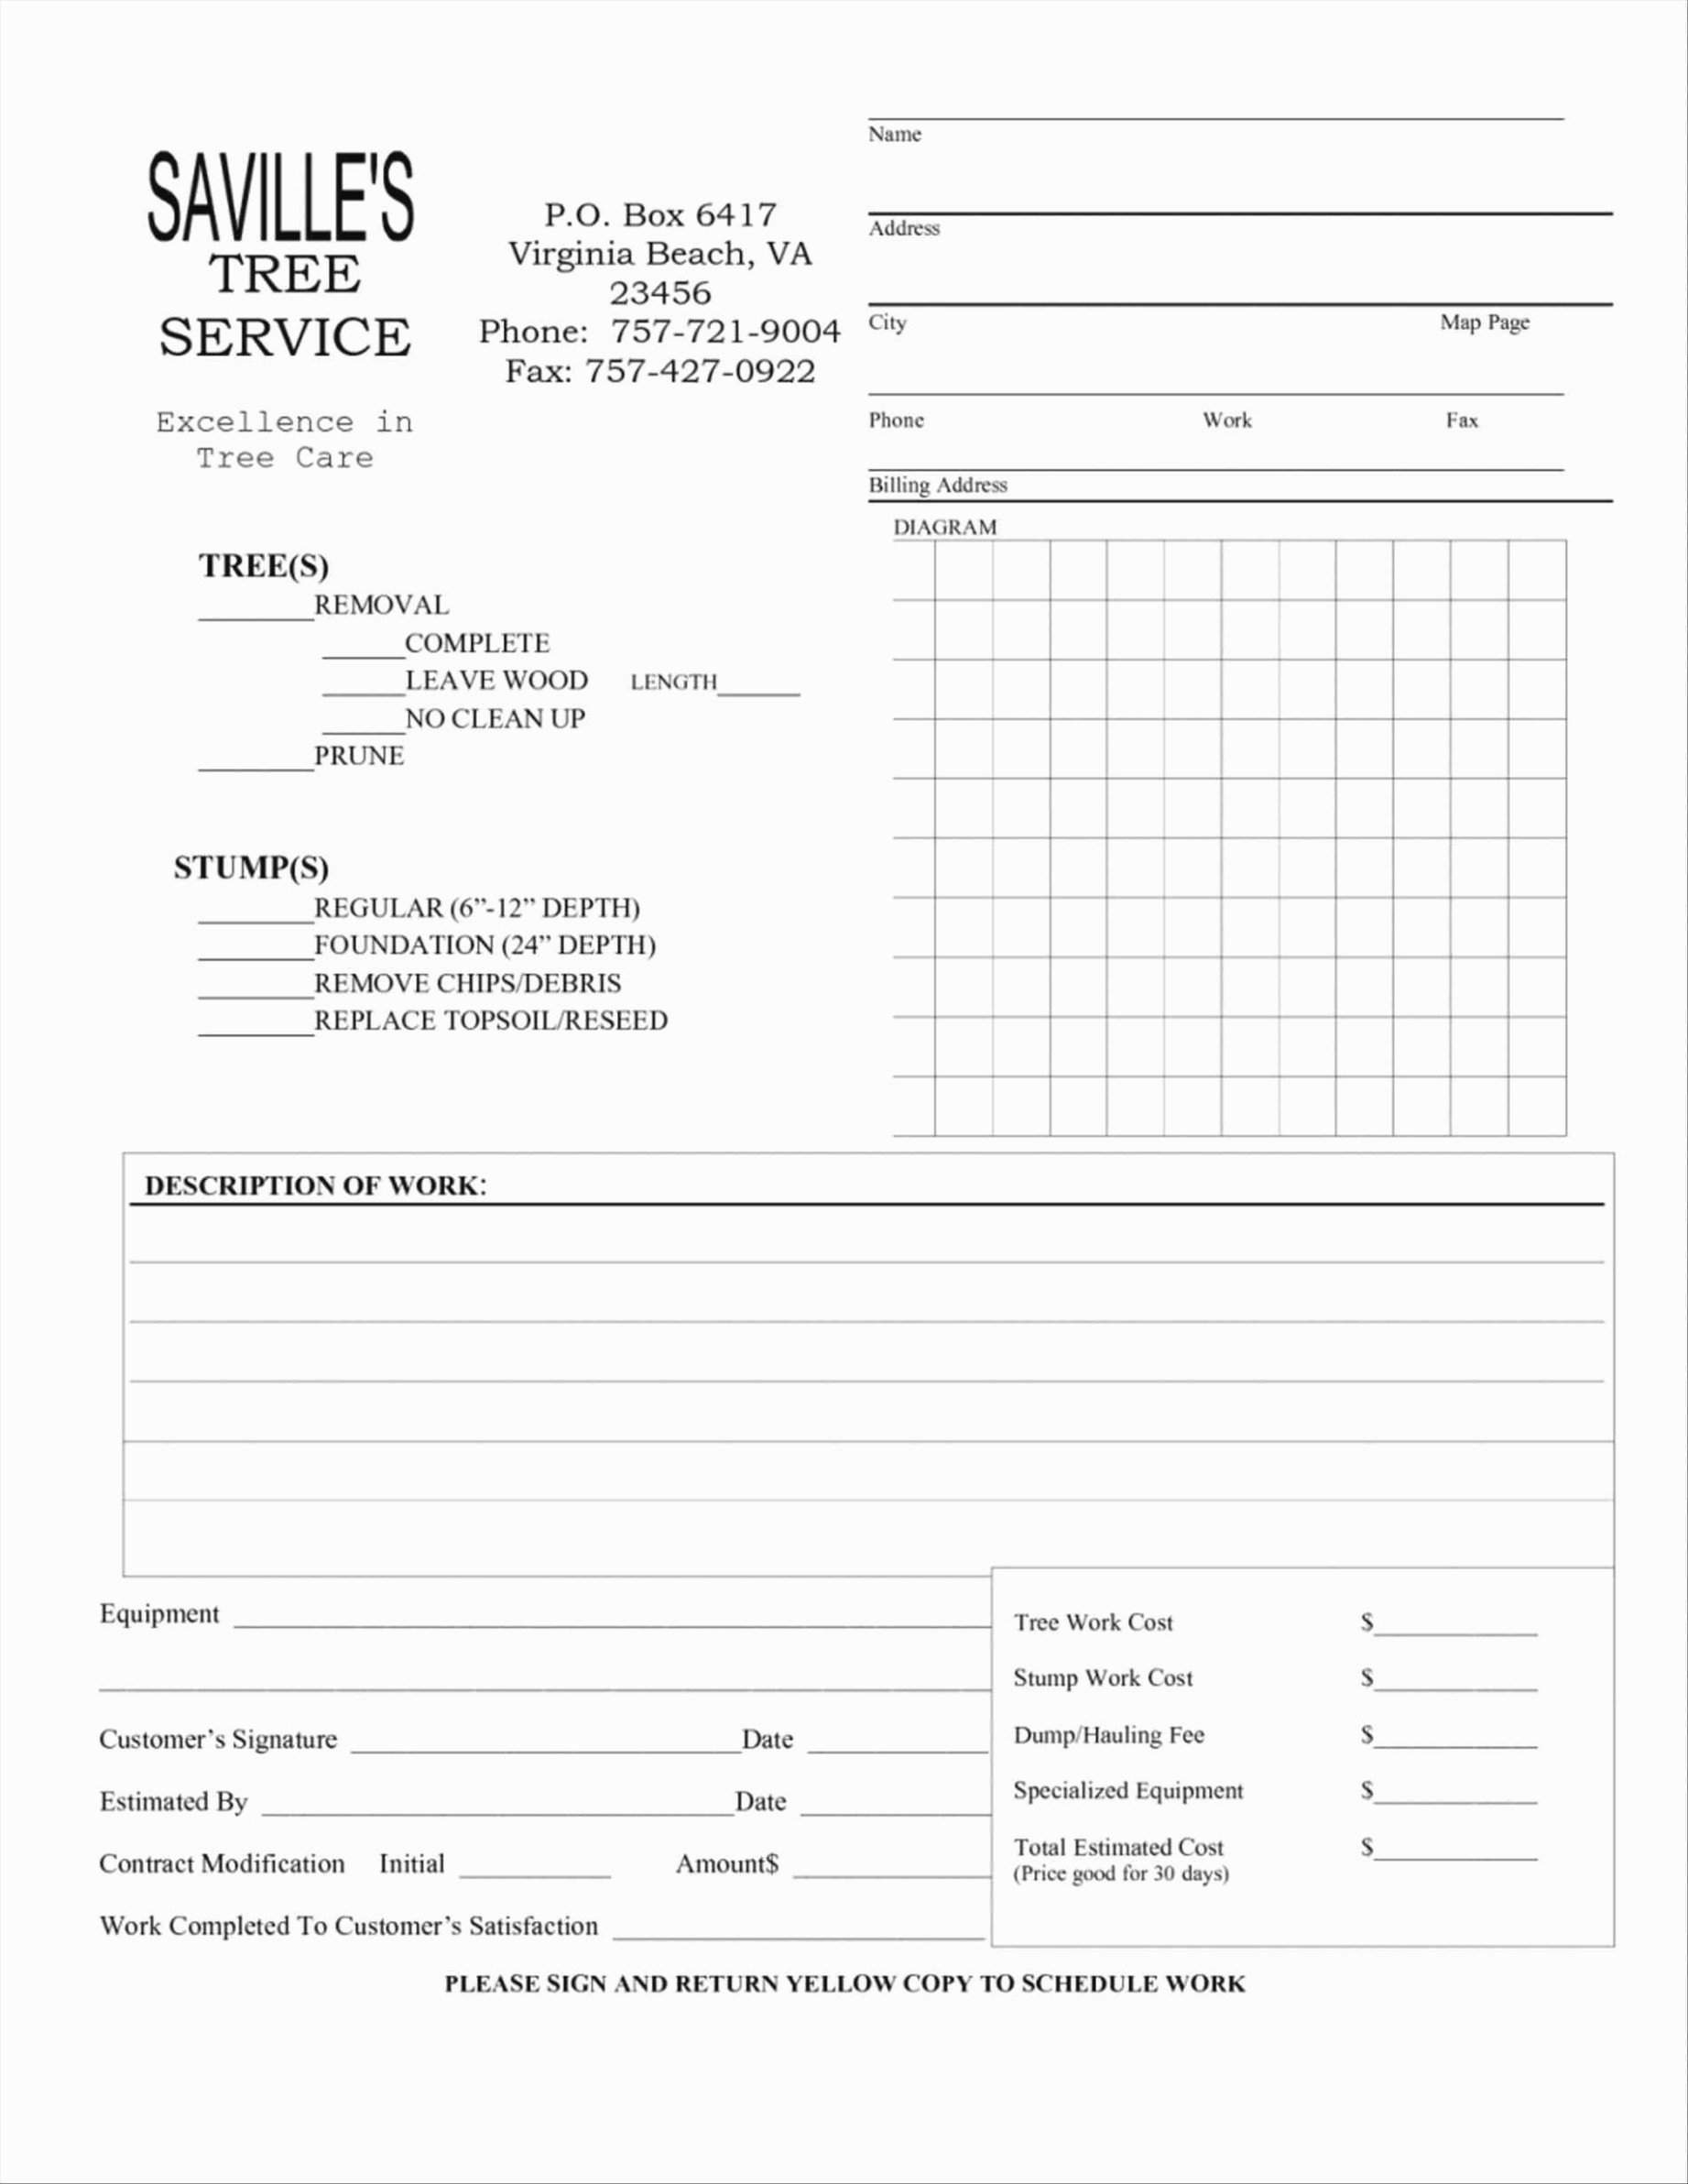 Tree Trimming Estimate Template Lovely 98 Tree Service Estimate Template Tree Service Business